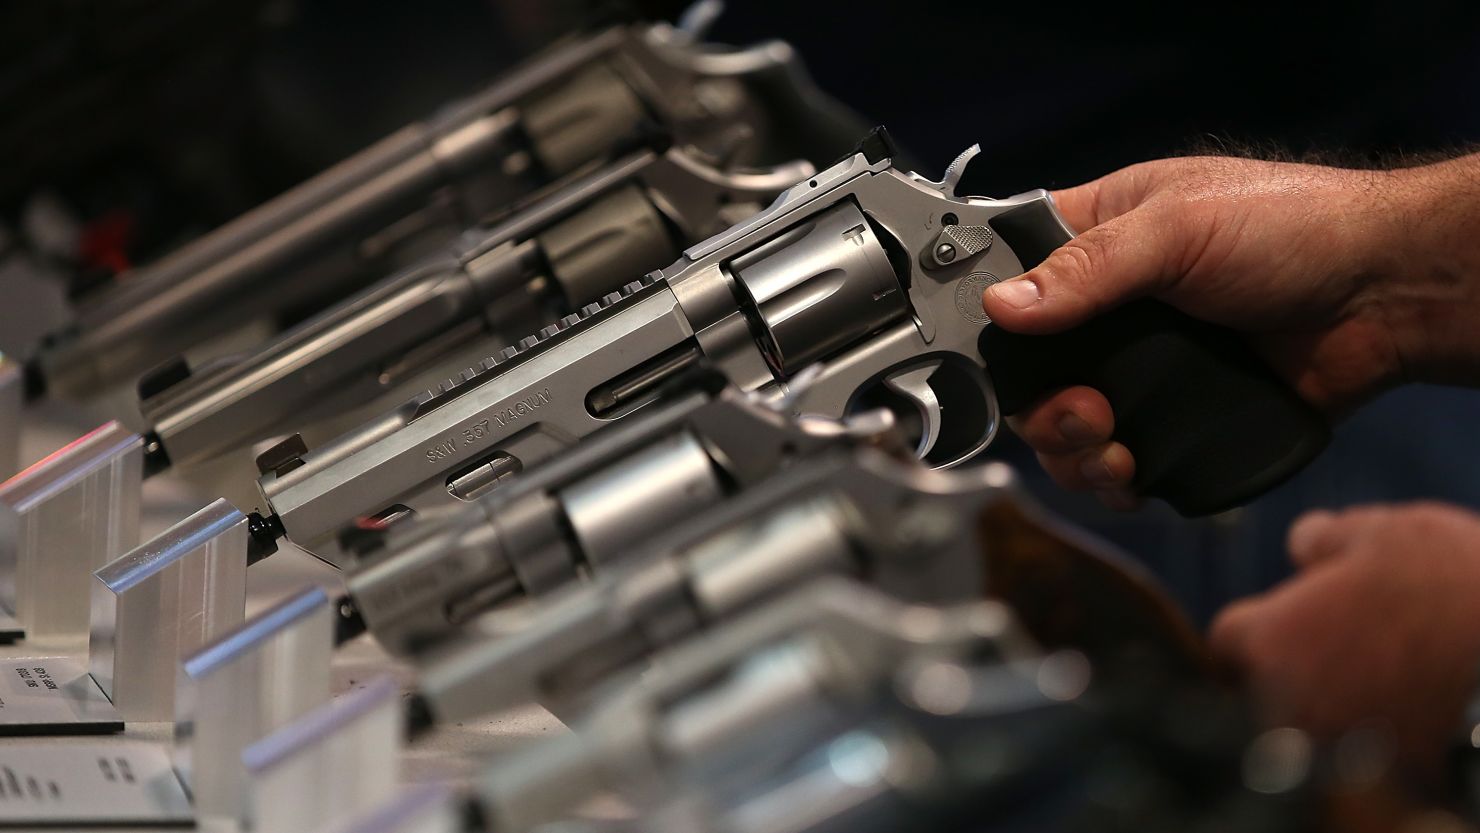 Smith and Wesson handguns are displayed during the 2015 NRA Annual Meeting & Exhibits on April 10, 2015 in Nashville, Tennessee. 